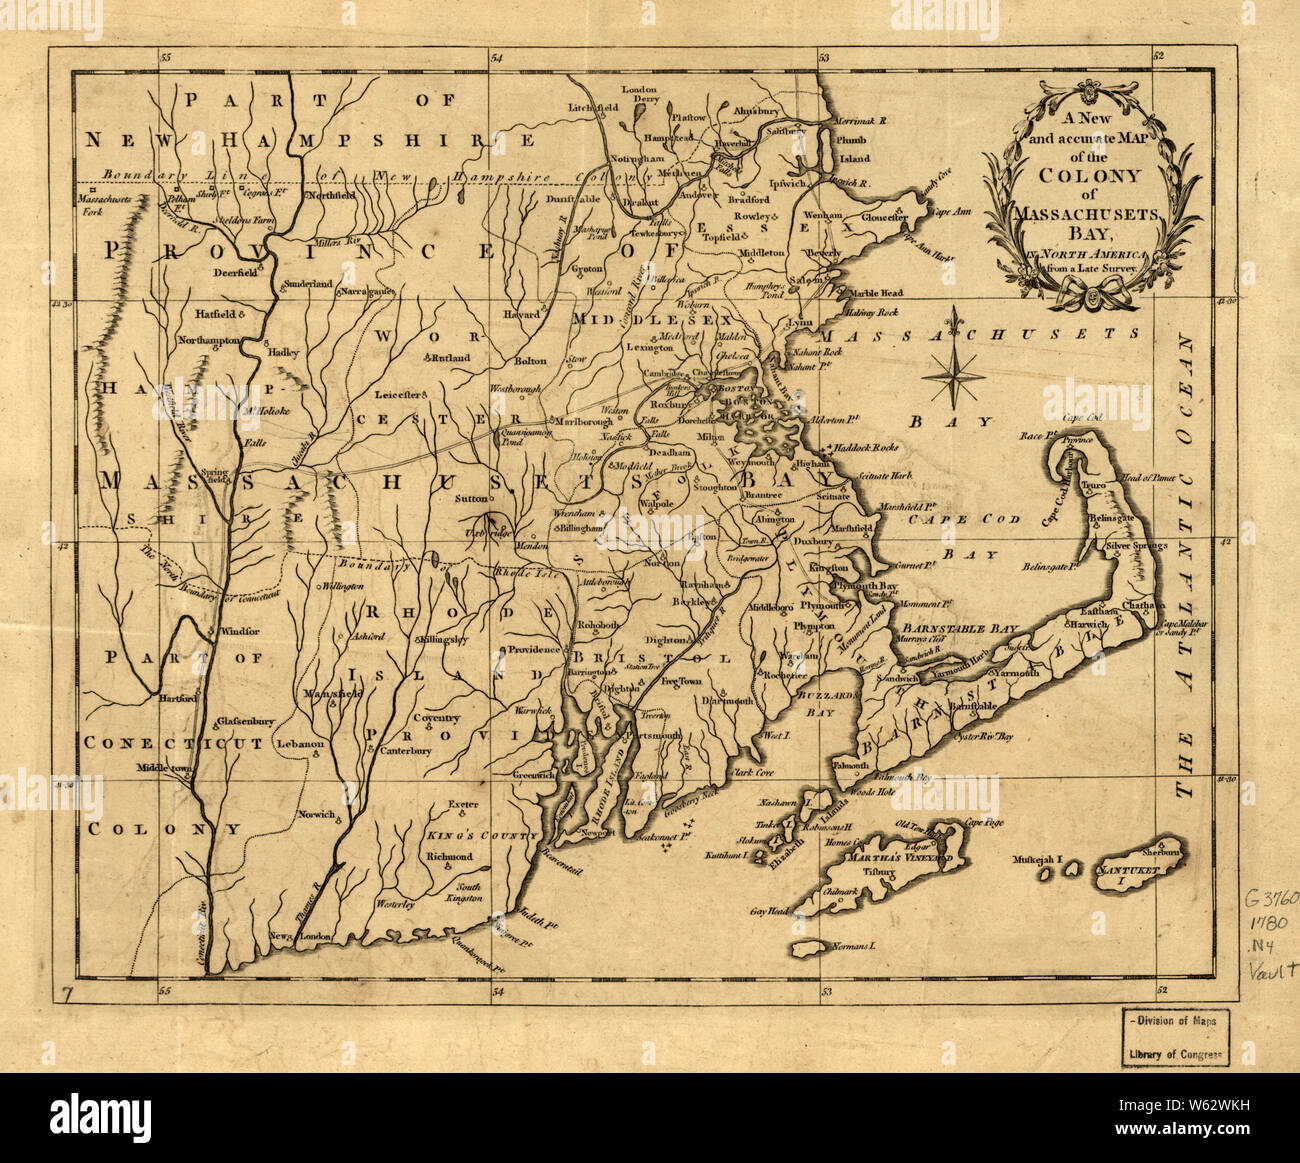 American Revolutionary War Era Maps 1750-1786 145 A new and accurate map of the colony of Massachusets ie Massachusetts Bay in North America from a late Rebuild and Repair Stock Photo